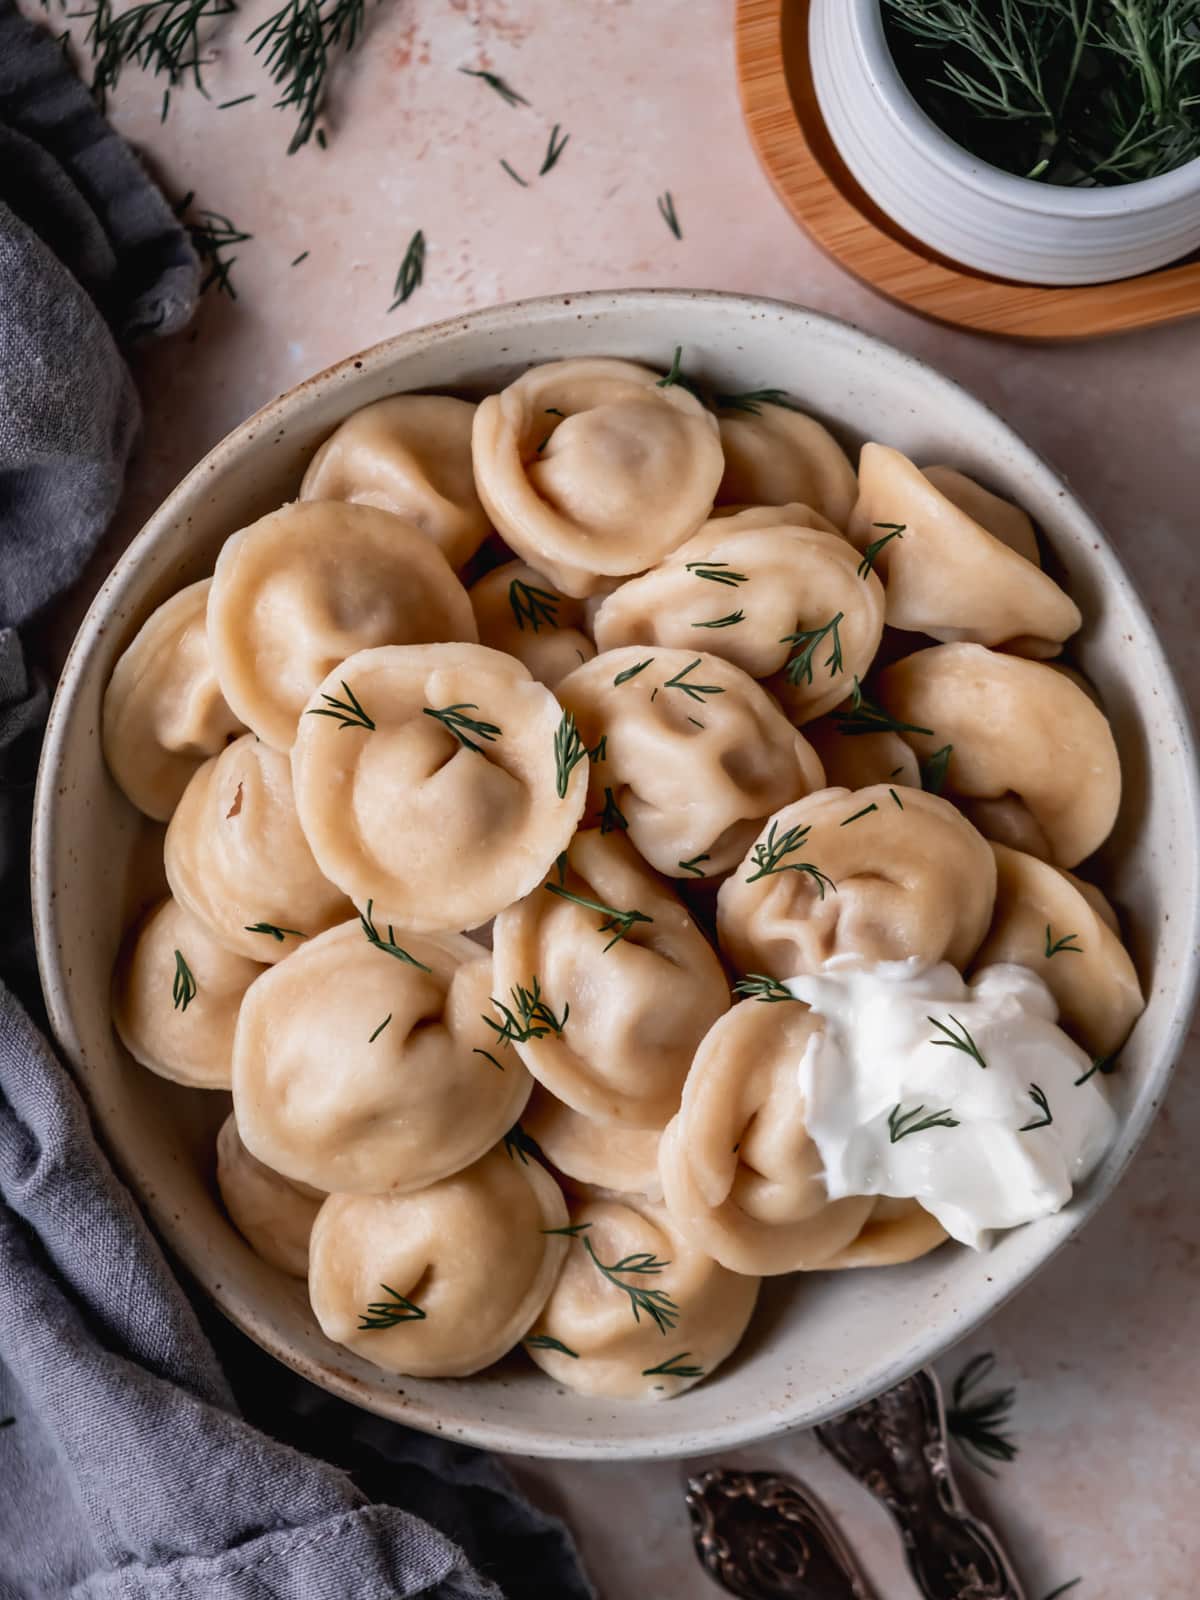 Siberian pelmeni on a plate garnished with fresh dill and sour cream.